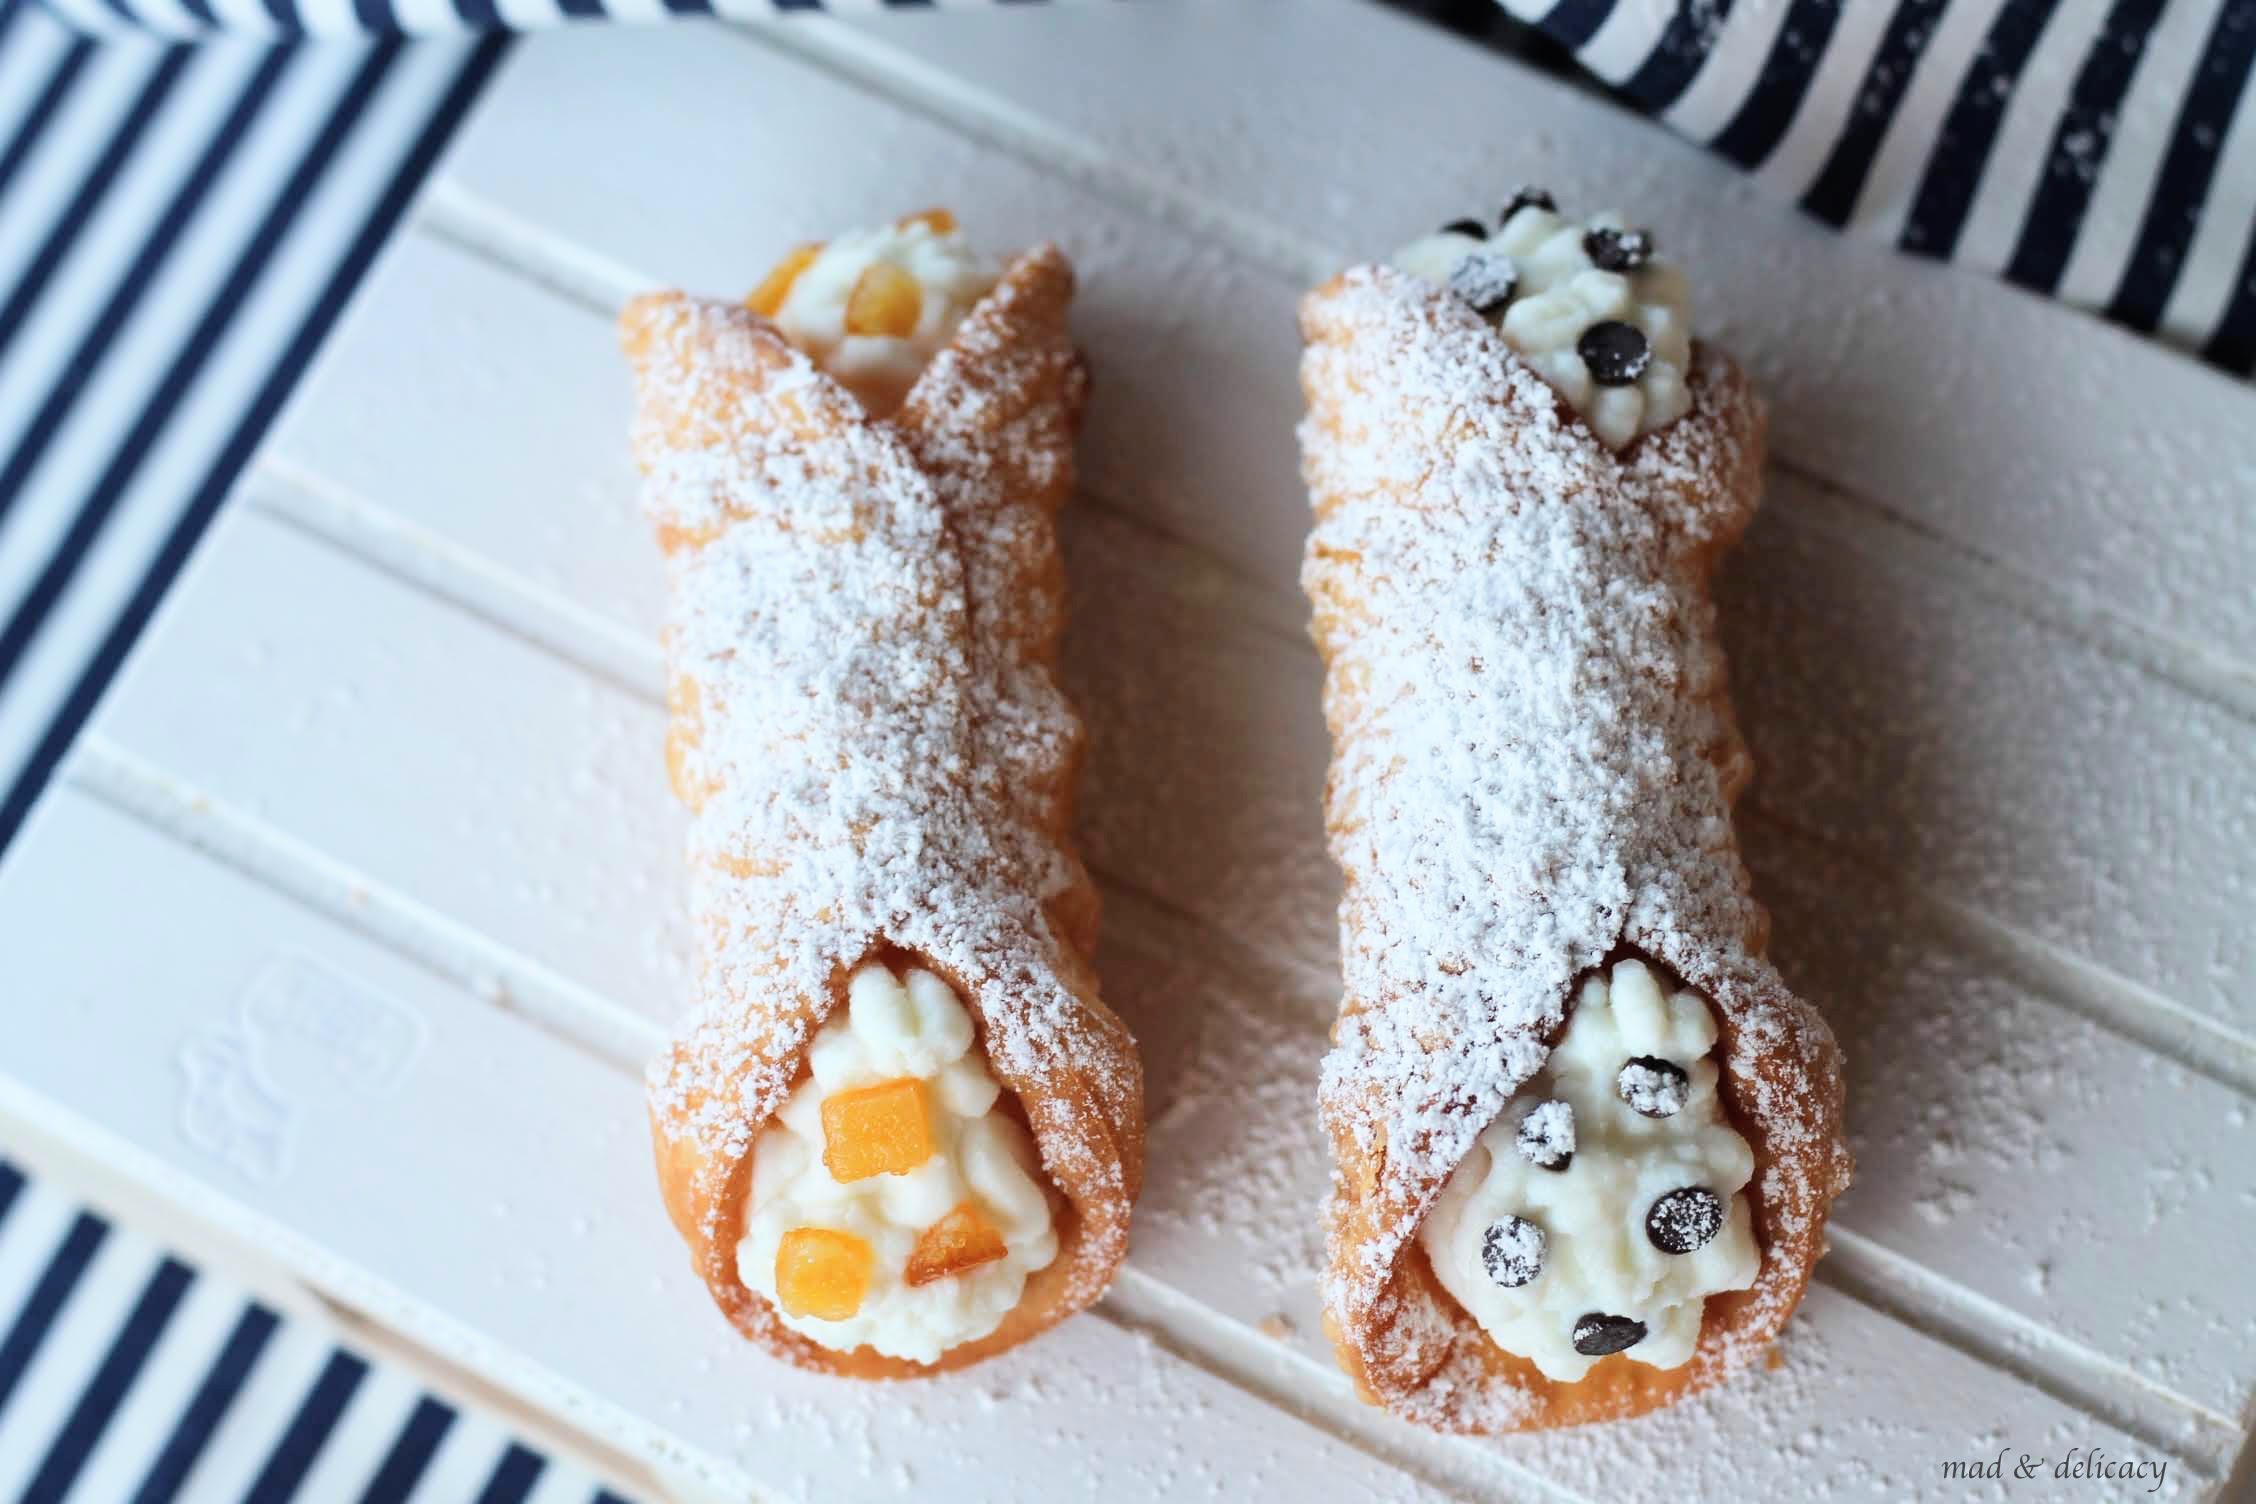 Sicilian Crunchy and Sweet Dessert: Cannoli filled with Ricotta Cheese